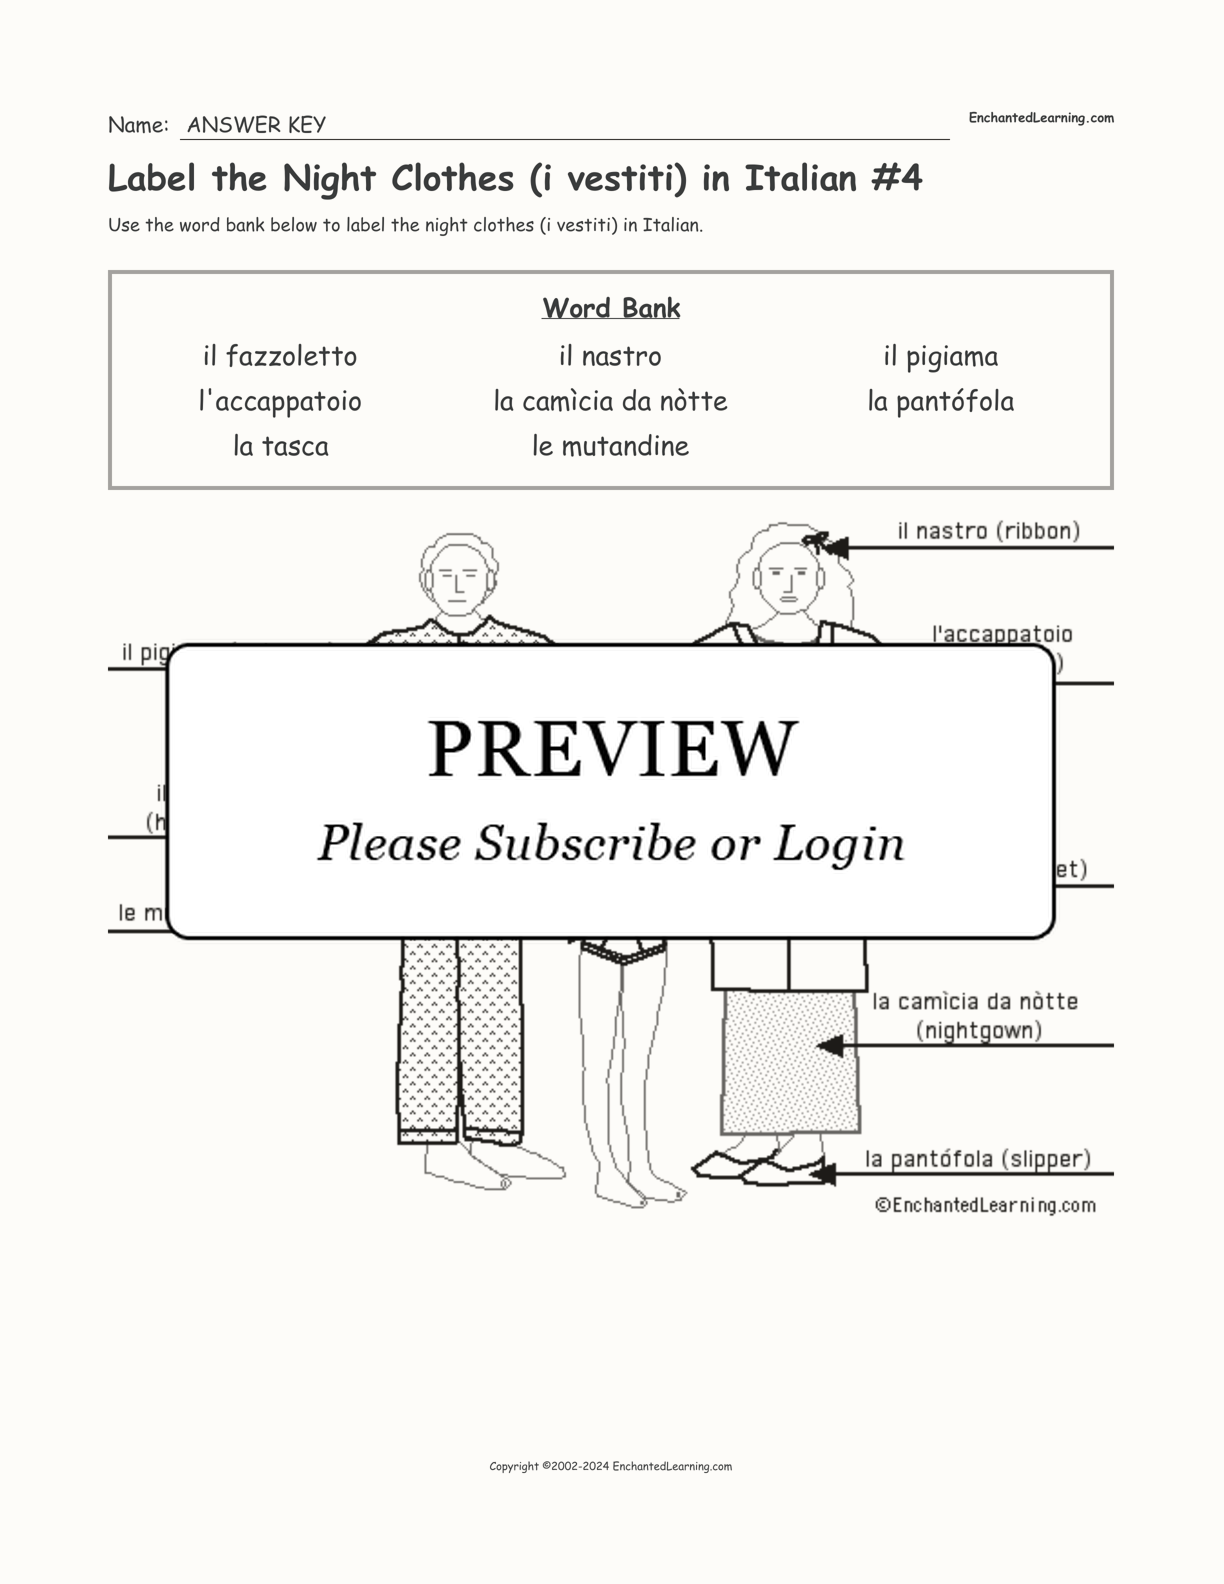 Label the Night Clothes (i vestiti) in Italian #4 interactive worksheet page 2